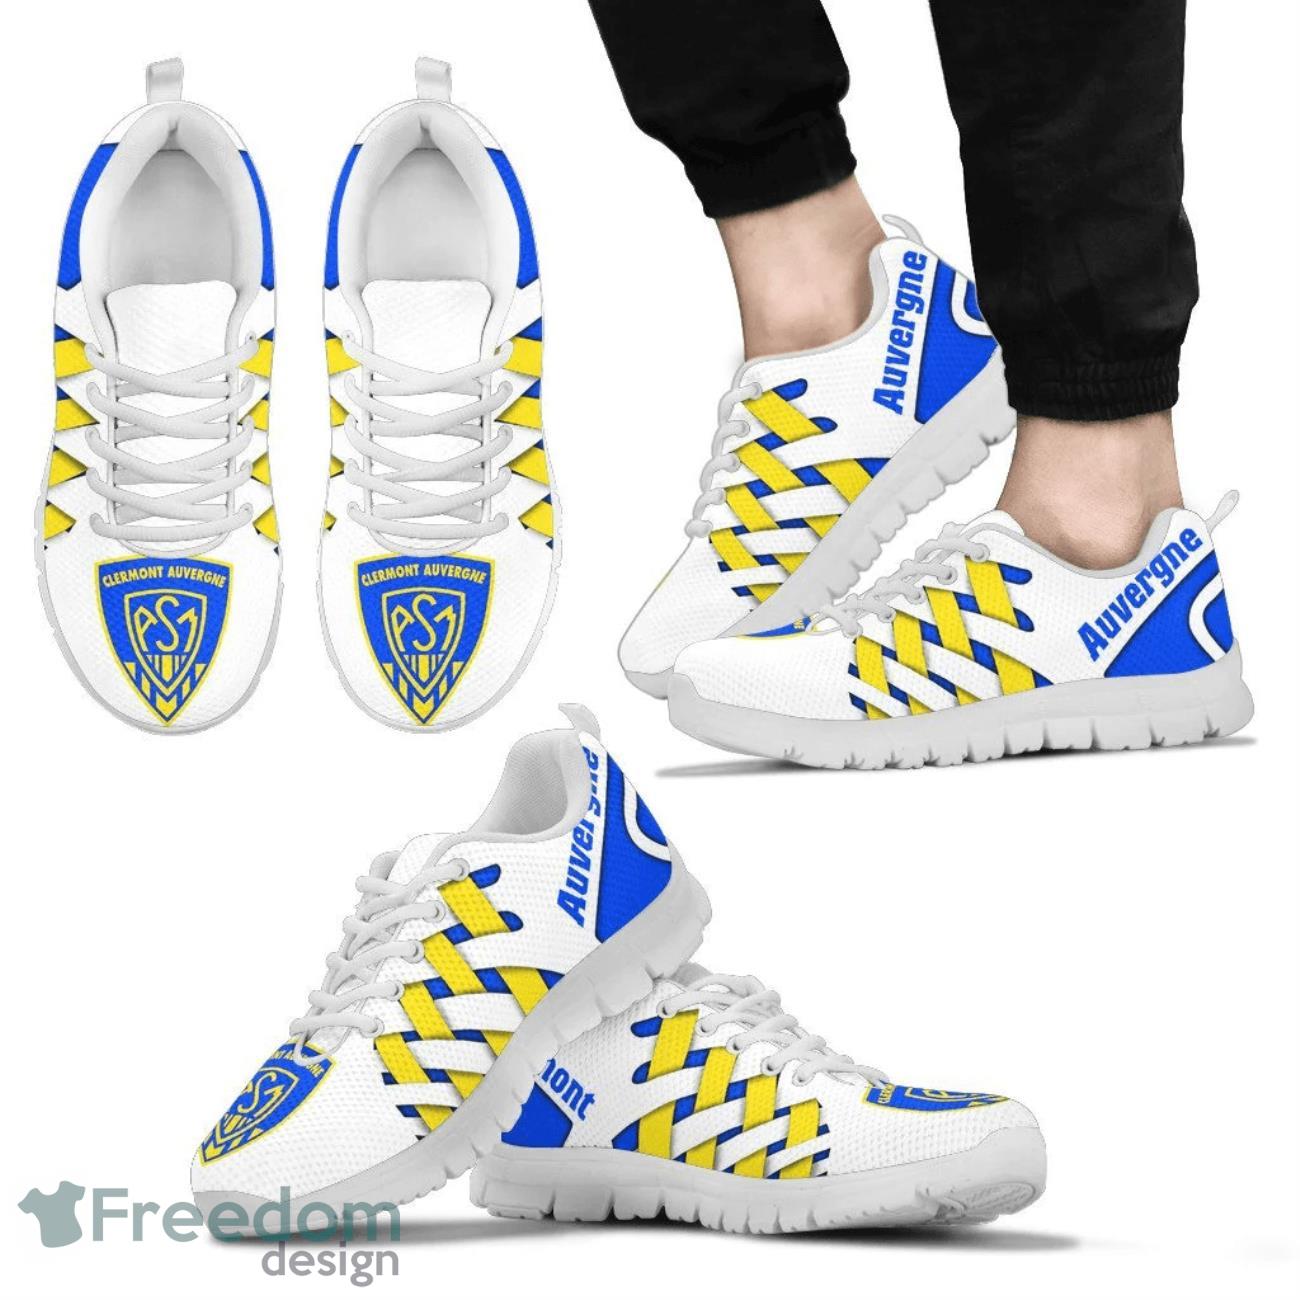 ASM Clermont Auvergne Logo Team Sneaker Shoes Gift For Fans Product Photo 2